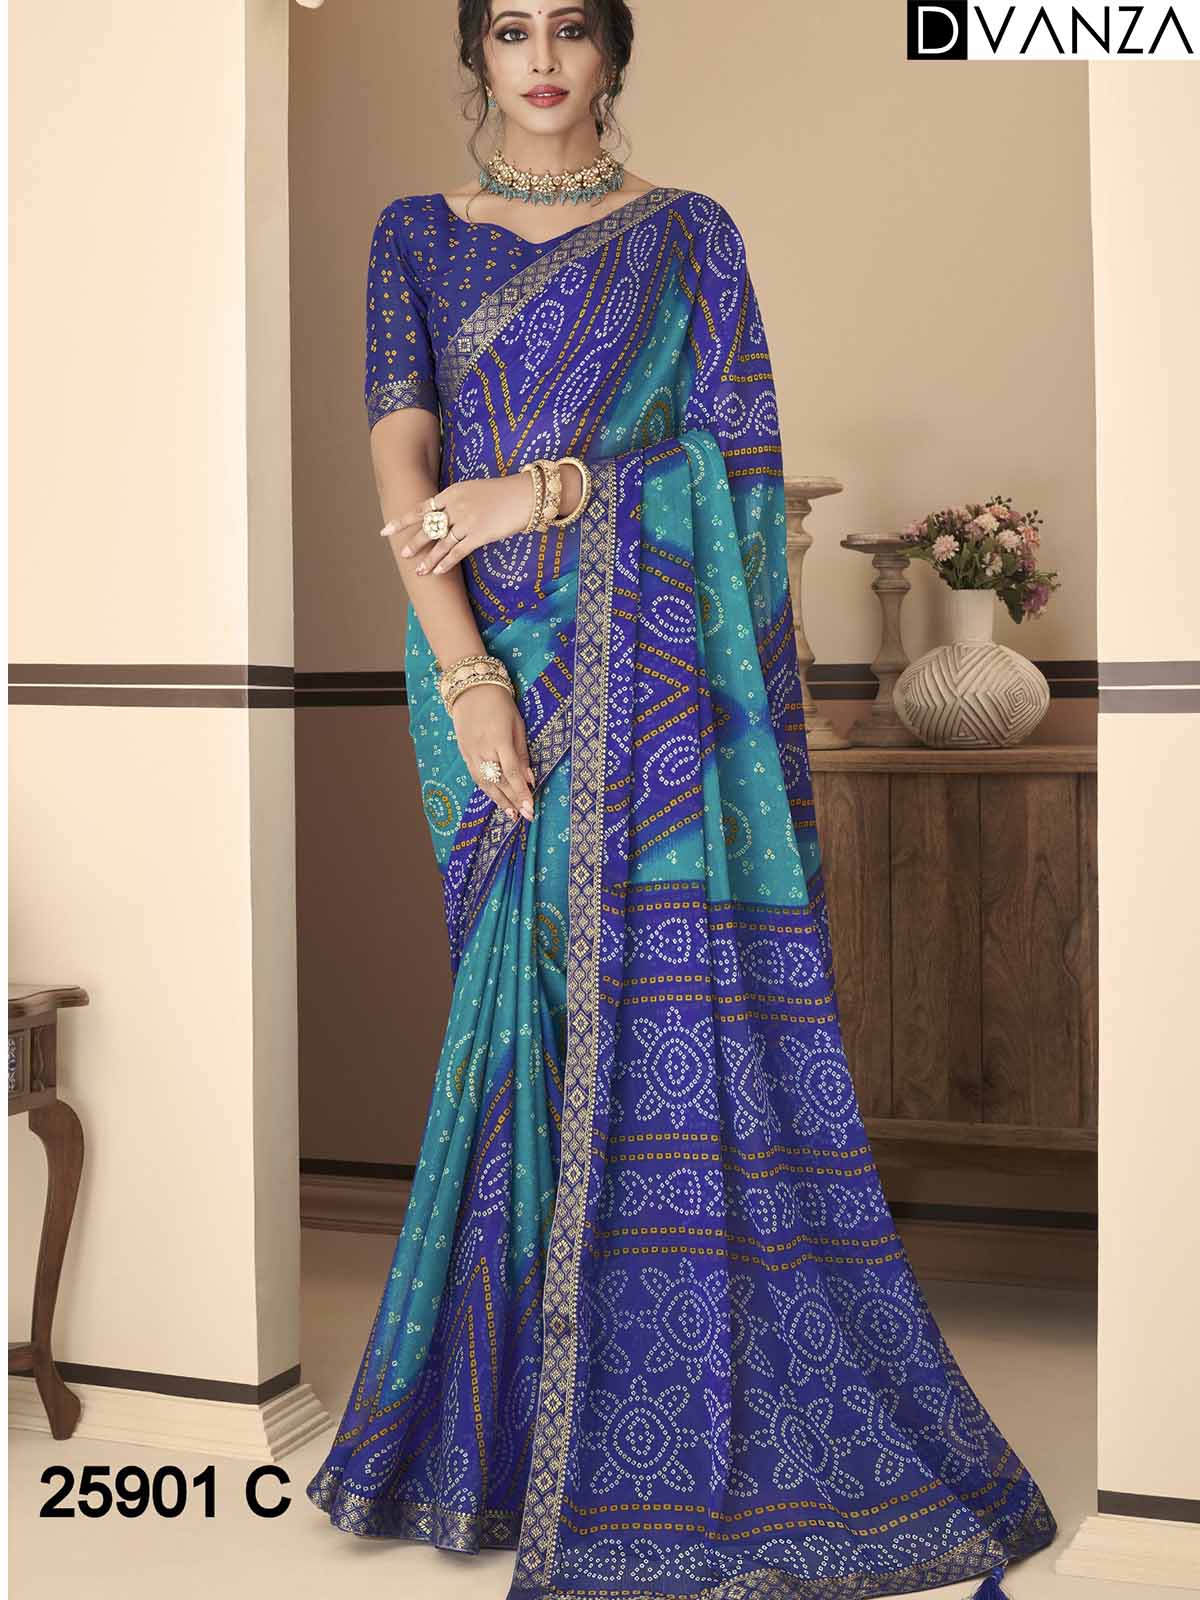 Buy Bandhani Printed Chiffon Saree with Attached Border, Jari, and Tassels Online in Best Quality - dvz0003805